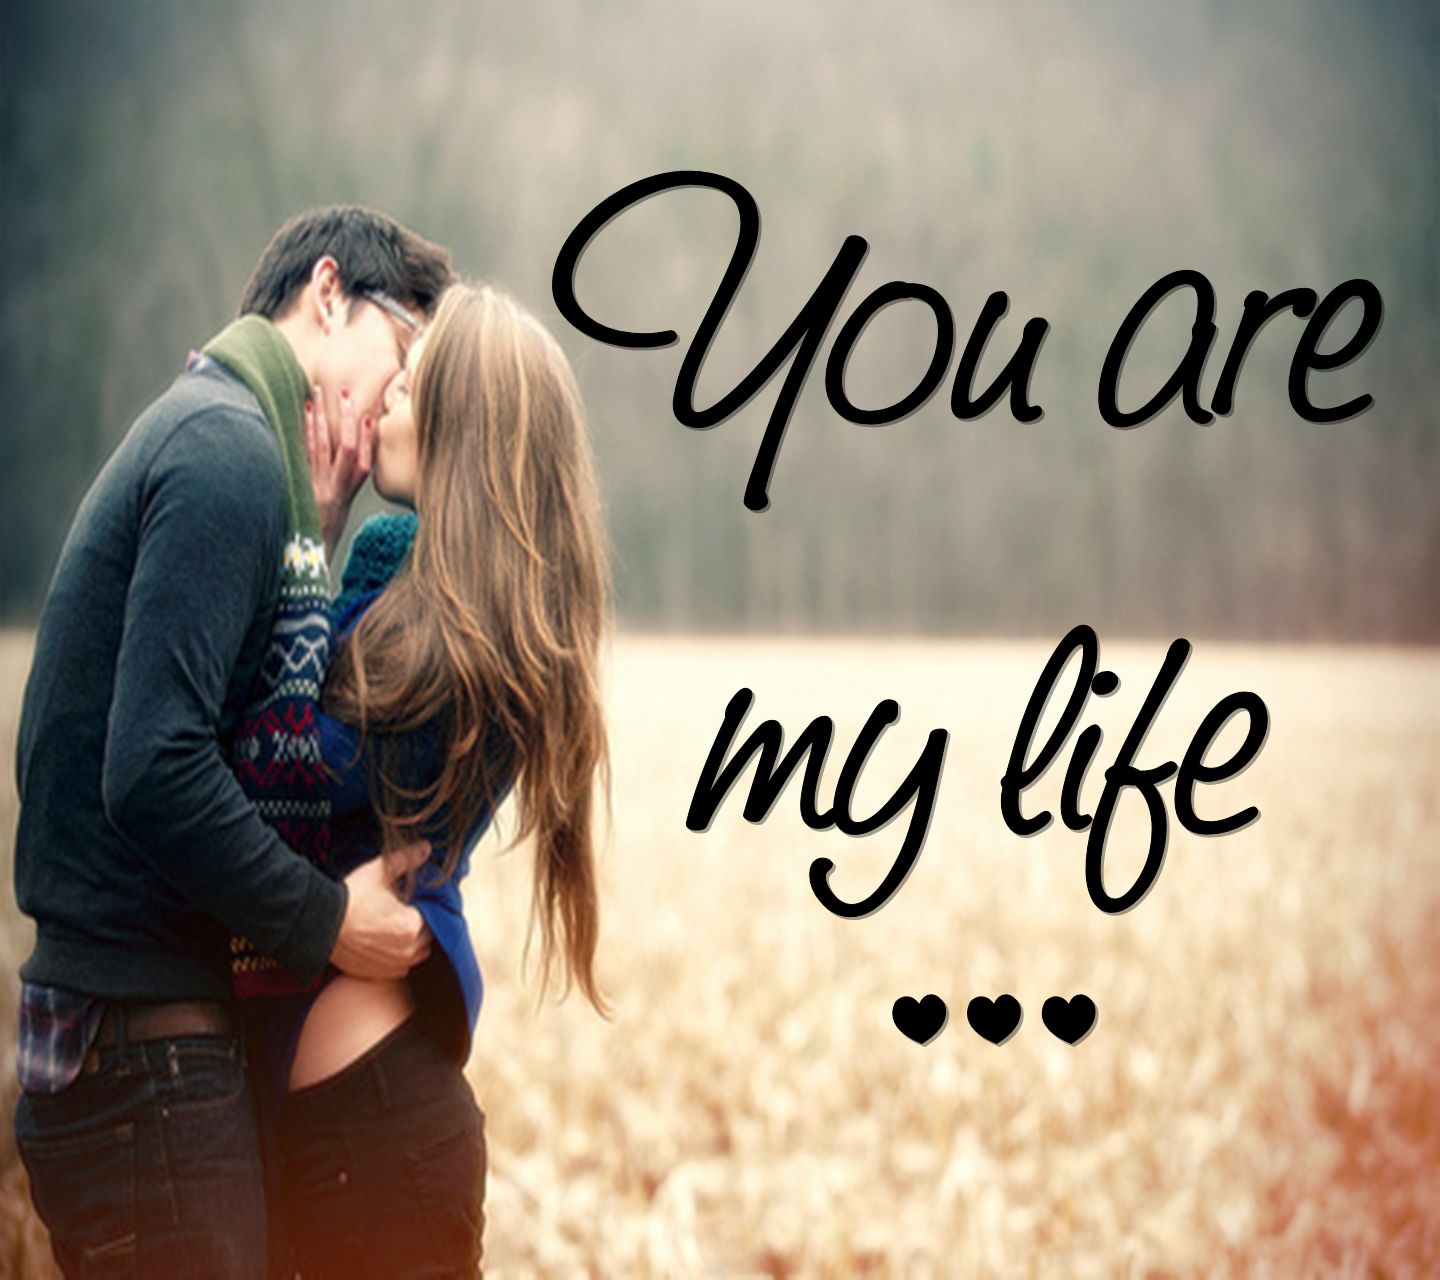 Couple Kiss With Quotes Image Get Wallpaper